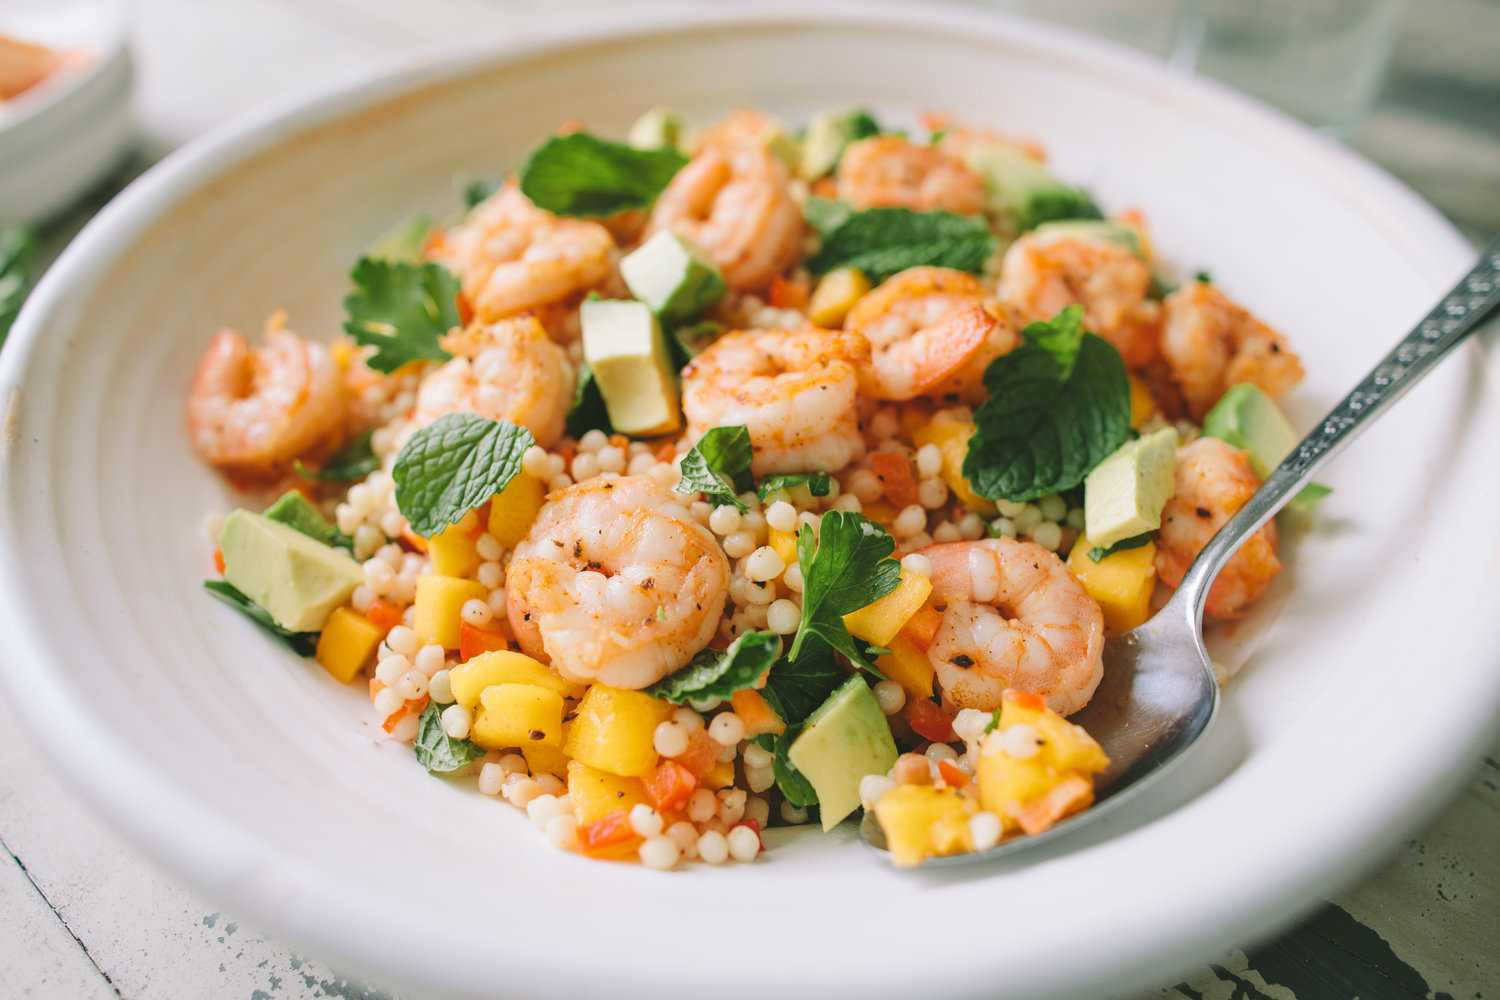 Shrimps Recipe Couscous Salat simply zucchini in summer ash to eat